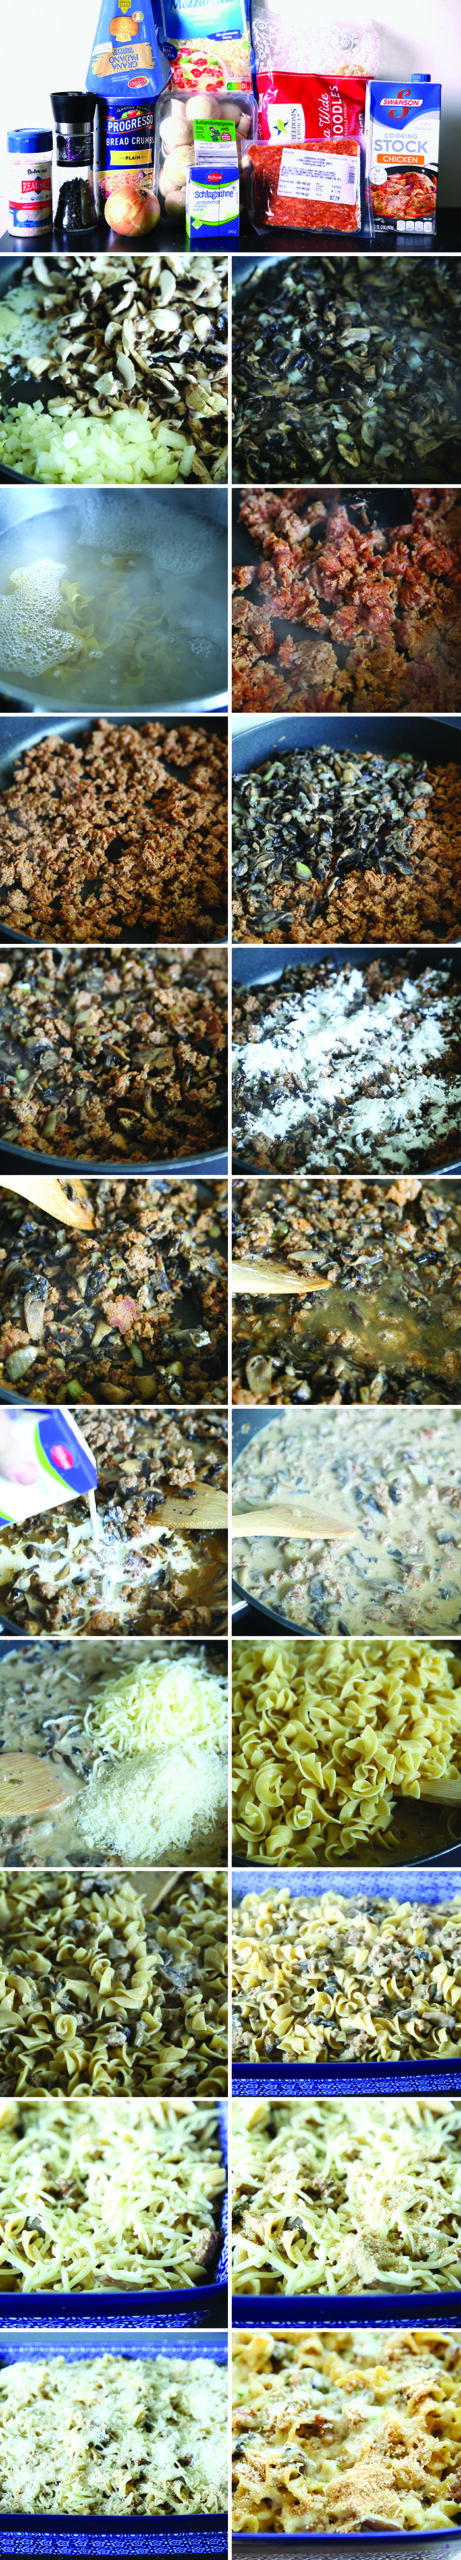 22-photo picture collage of step-by-step photos on how to make Stuffed Mushroom Casserole.